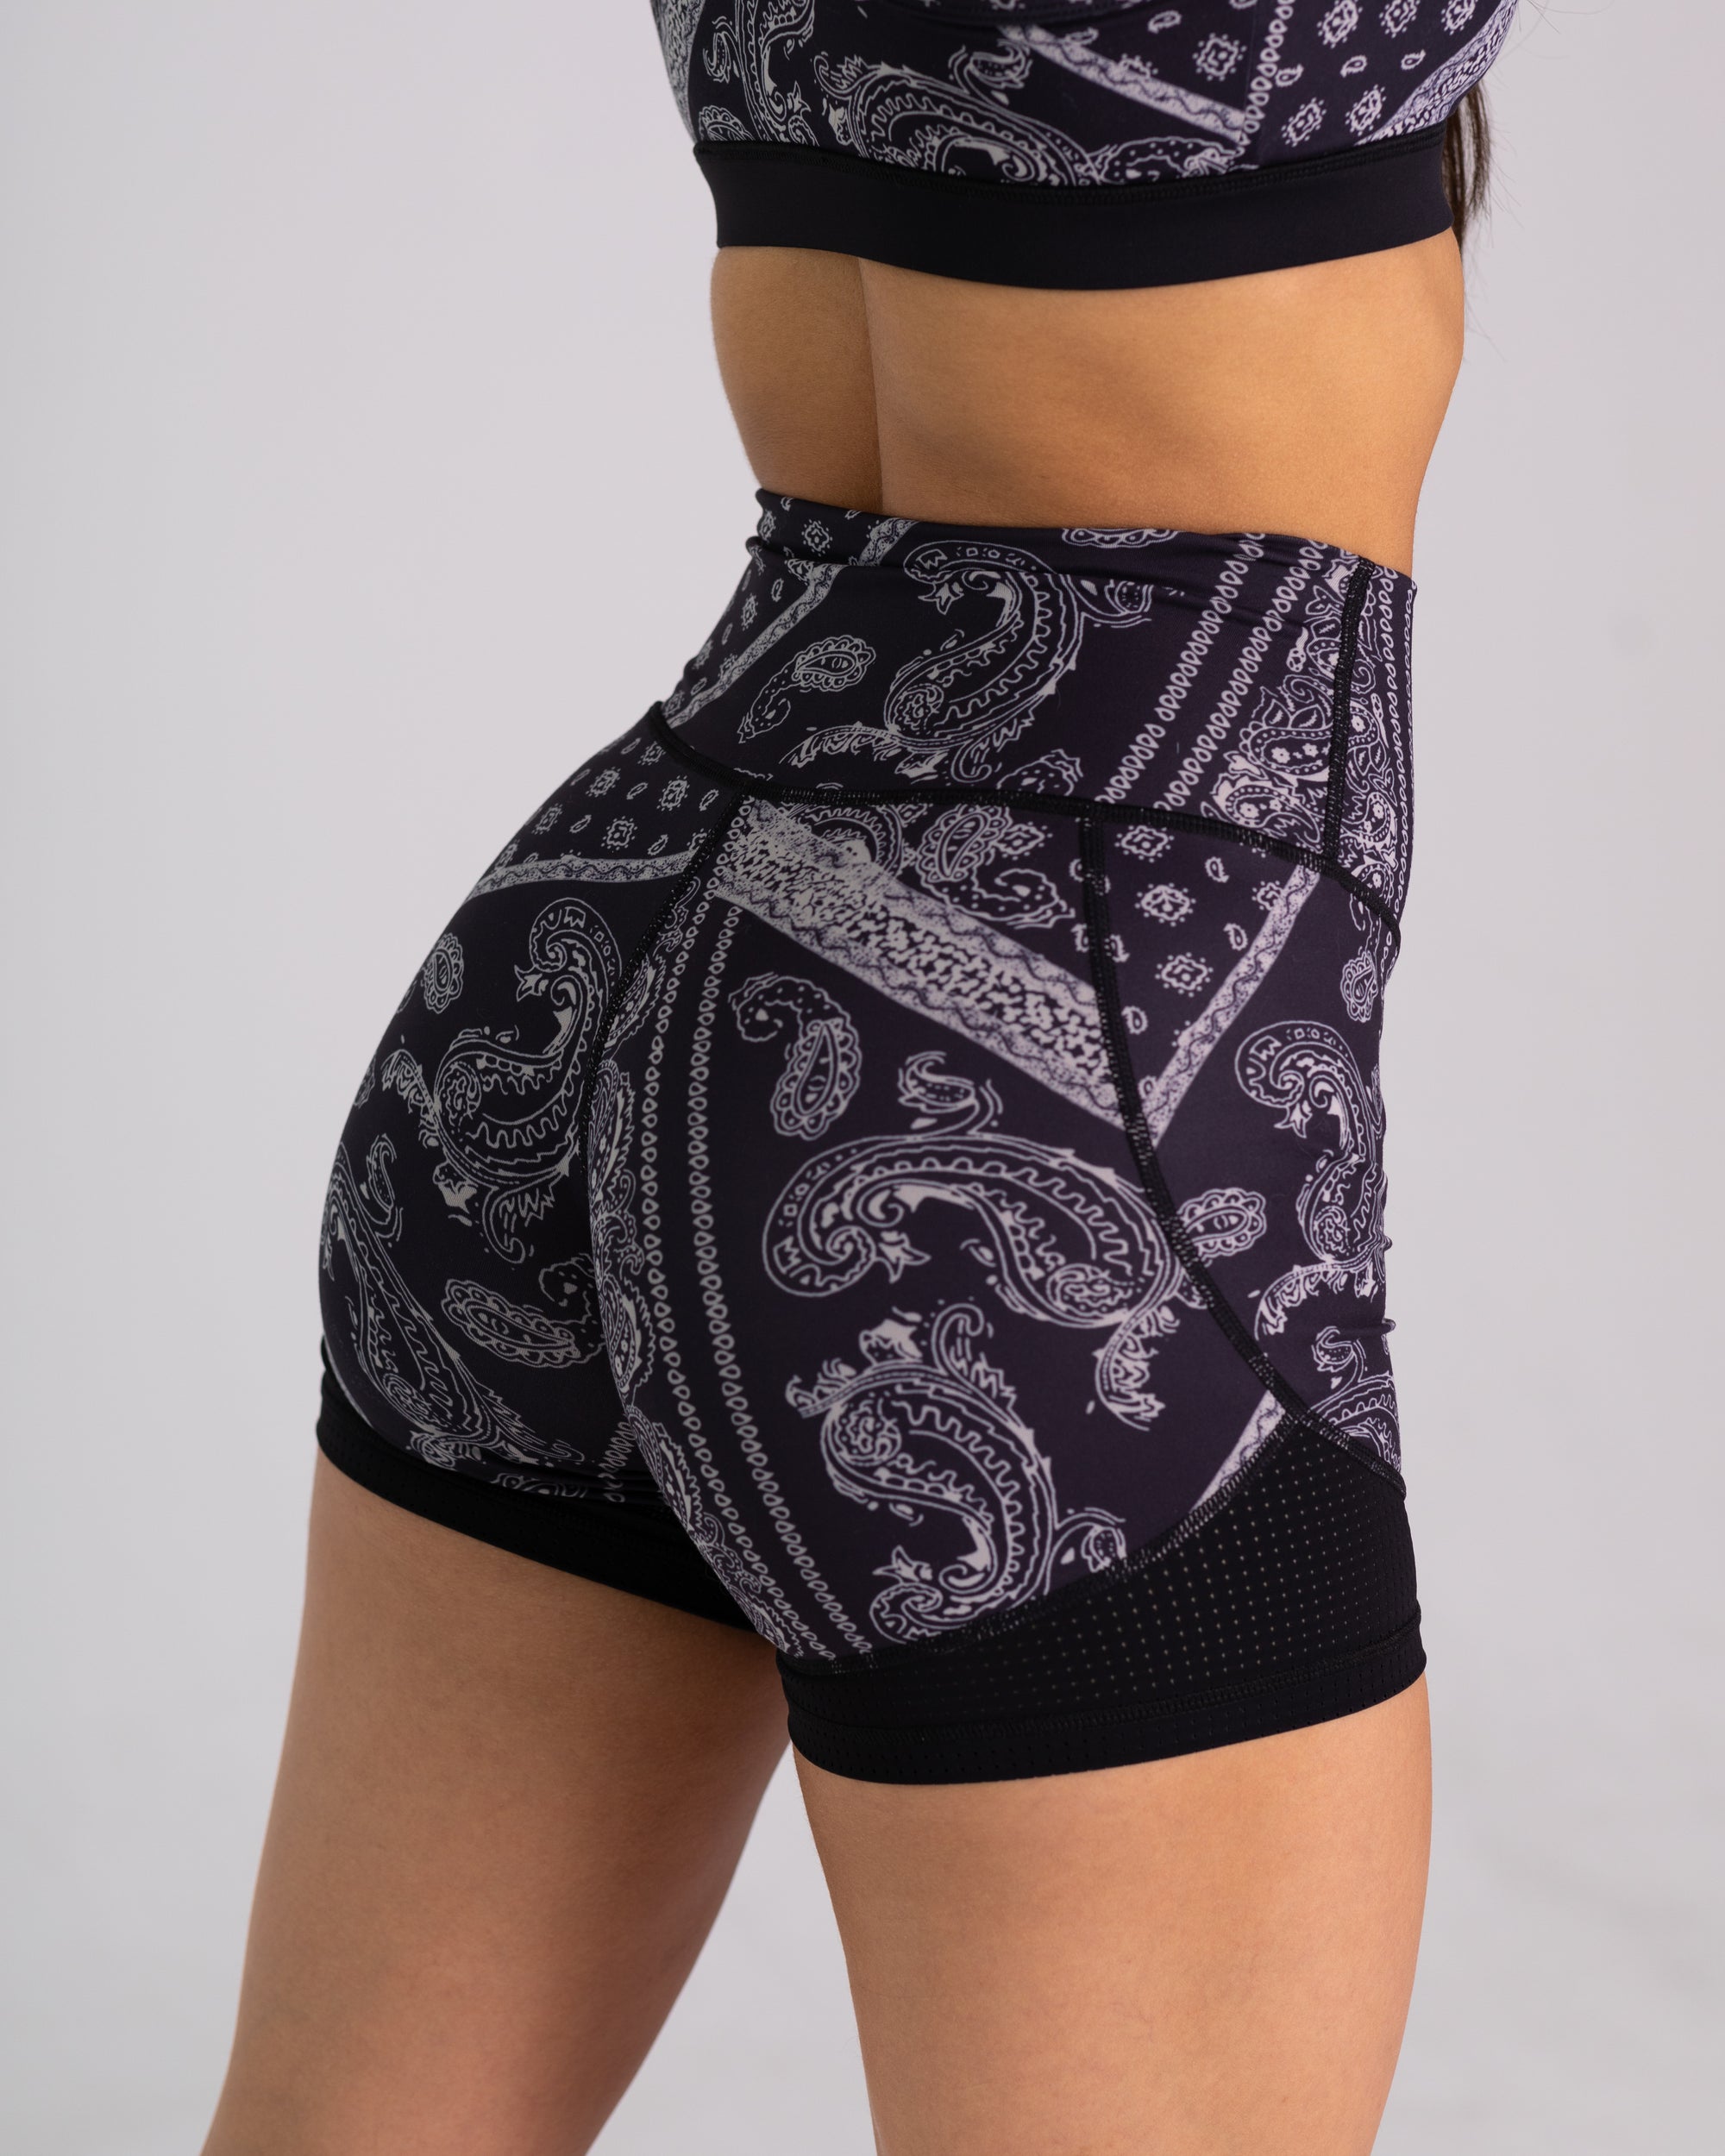 noireblanc, Ink Collection, High-waisted shorts, No elastic, Black, Paisley design with black mesh